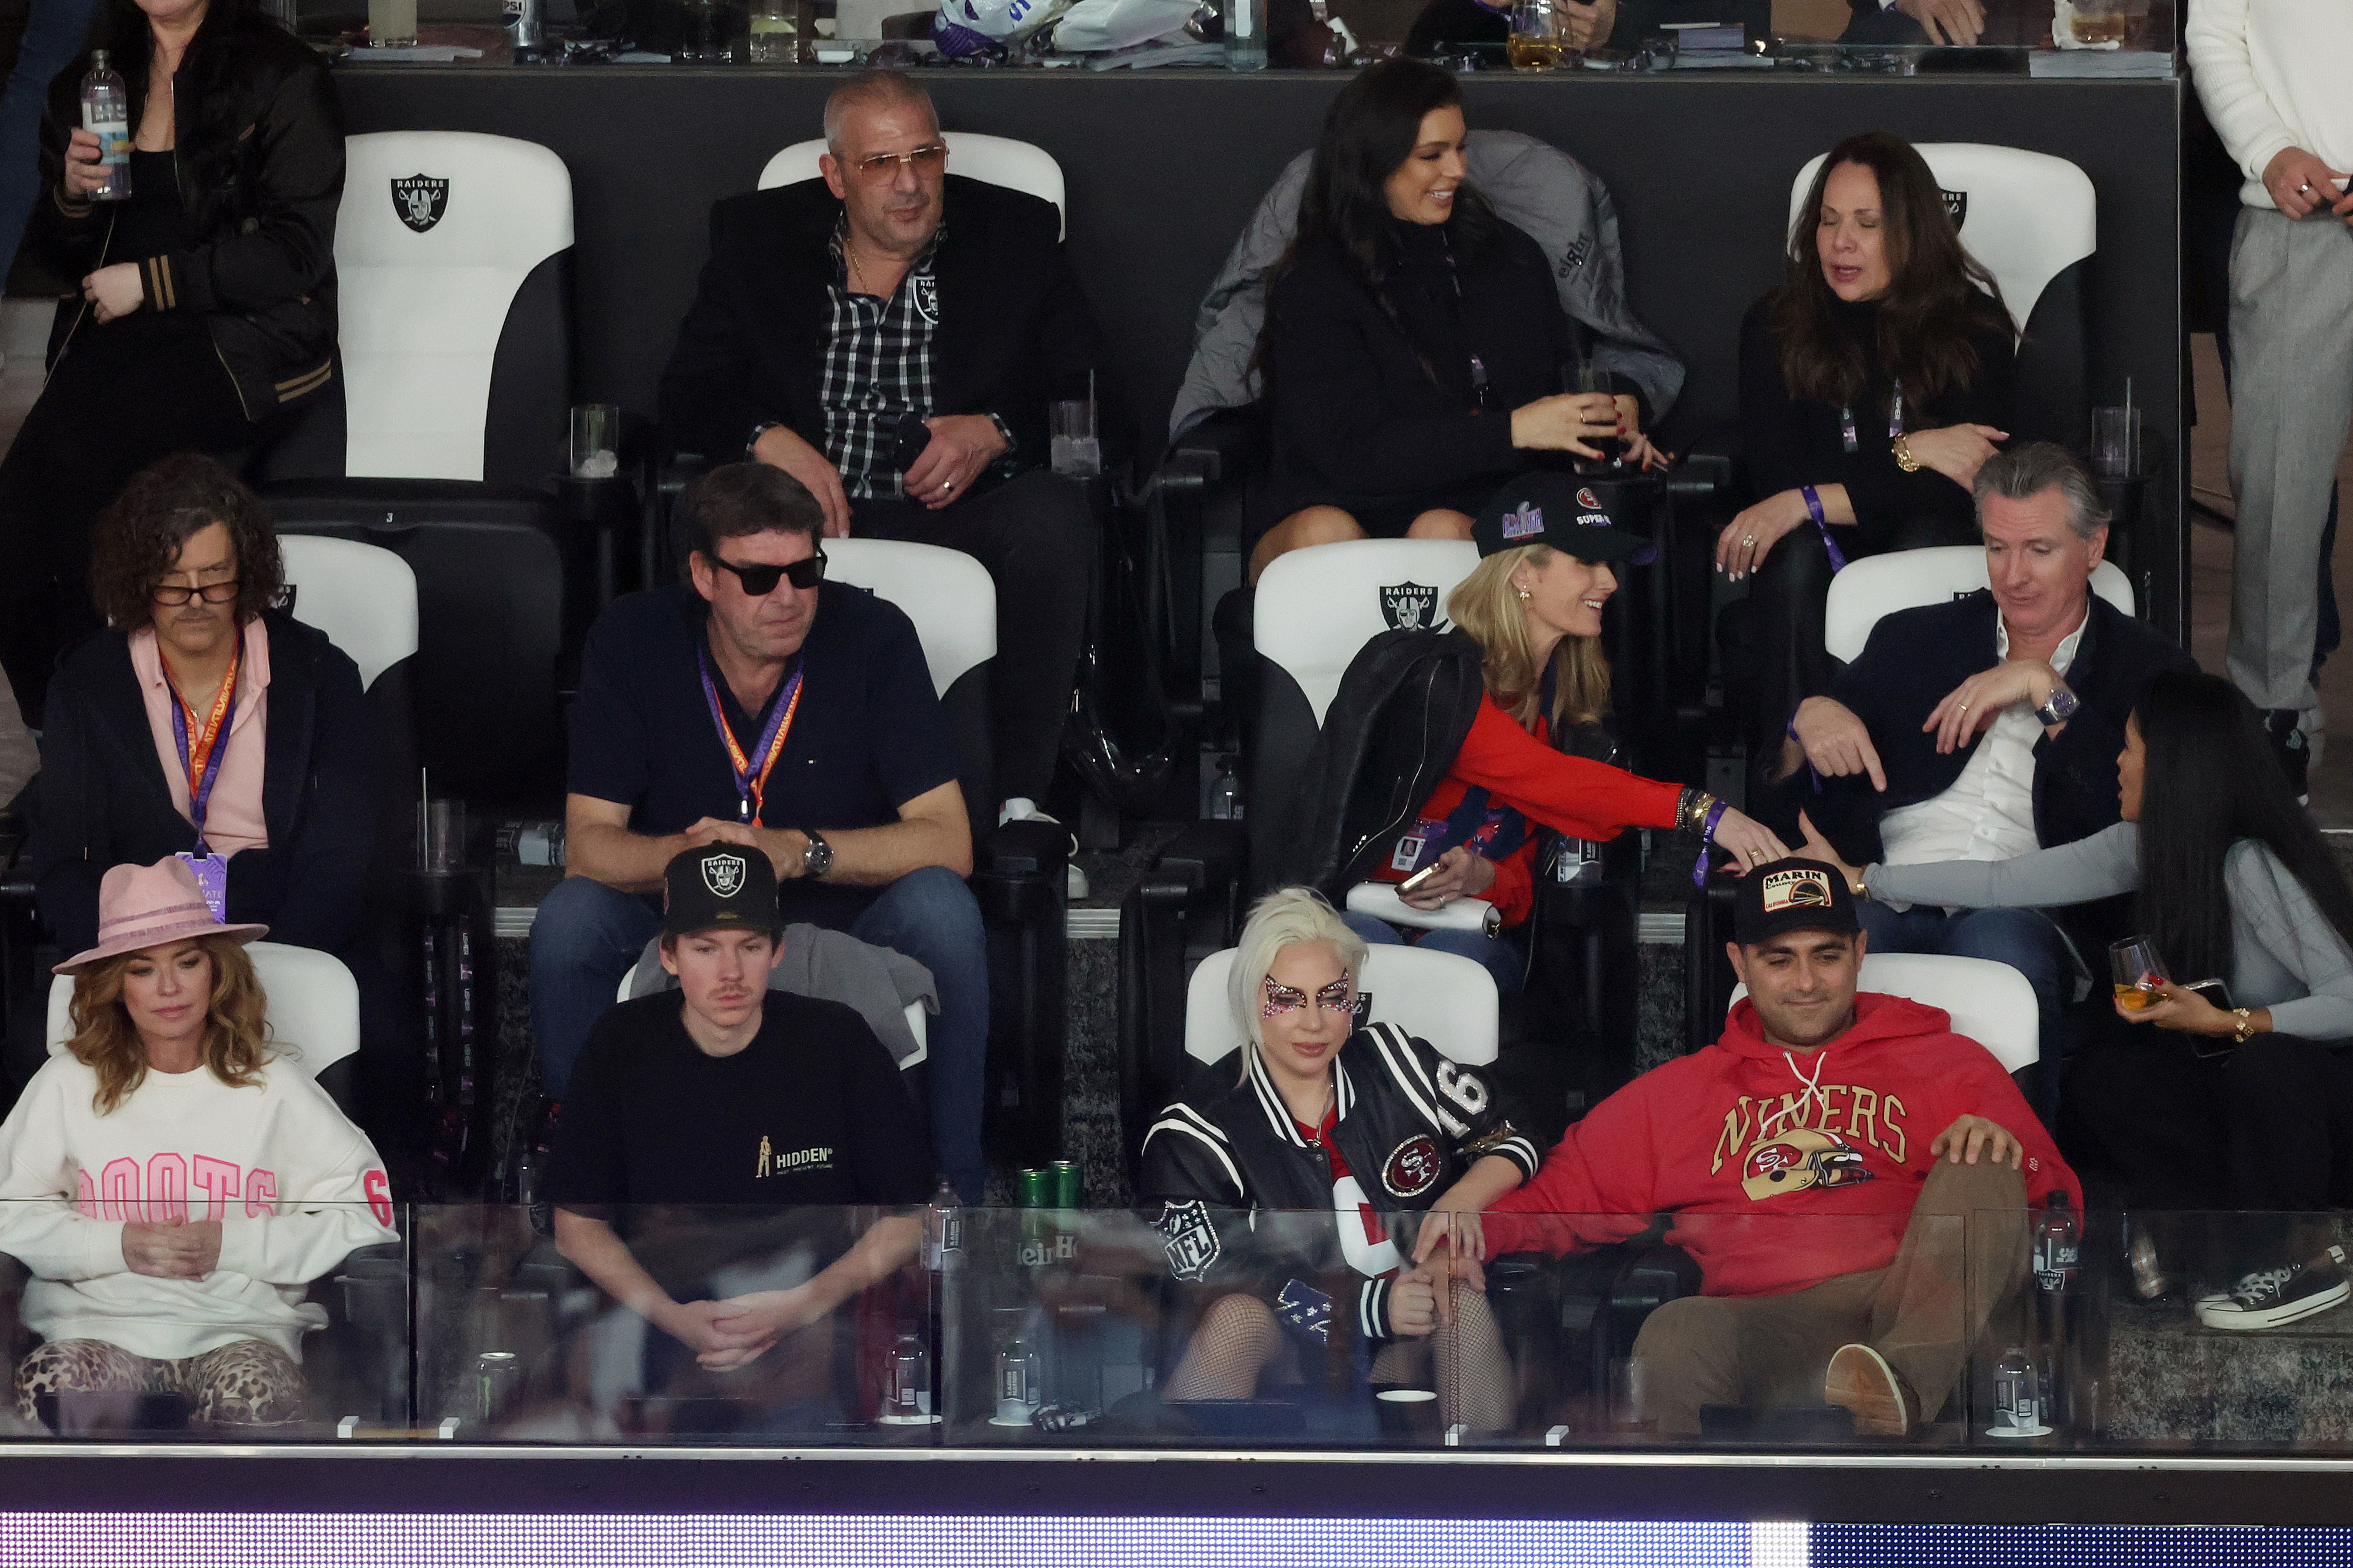 Gaga and Michael sitting in the stands